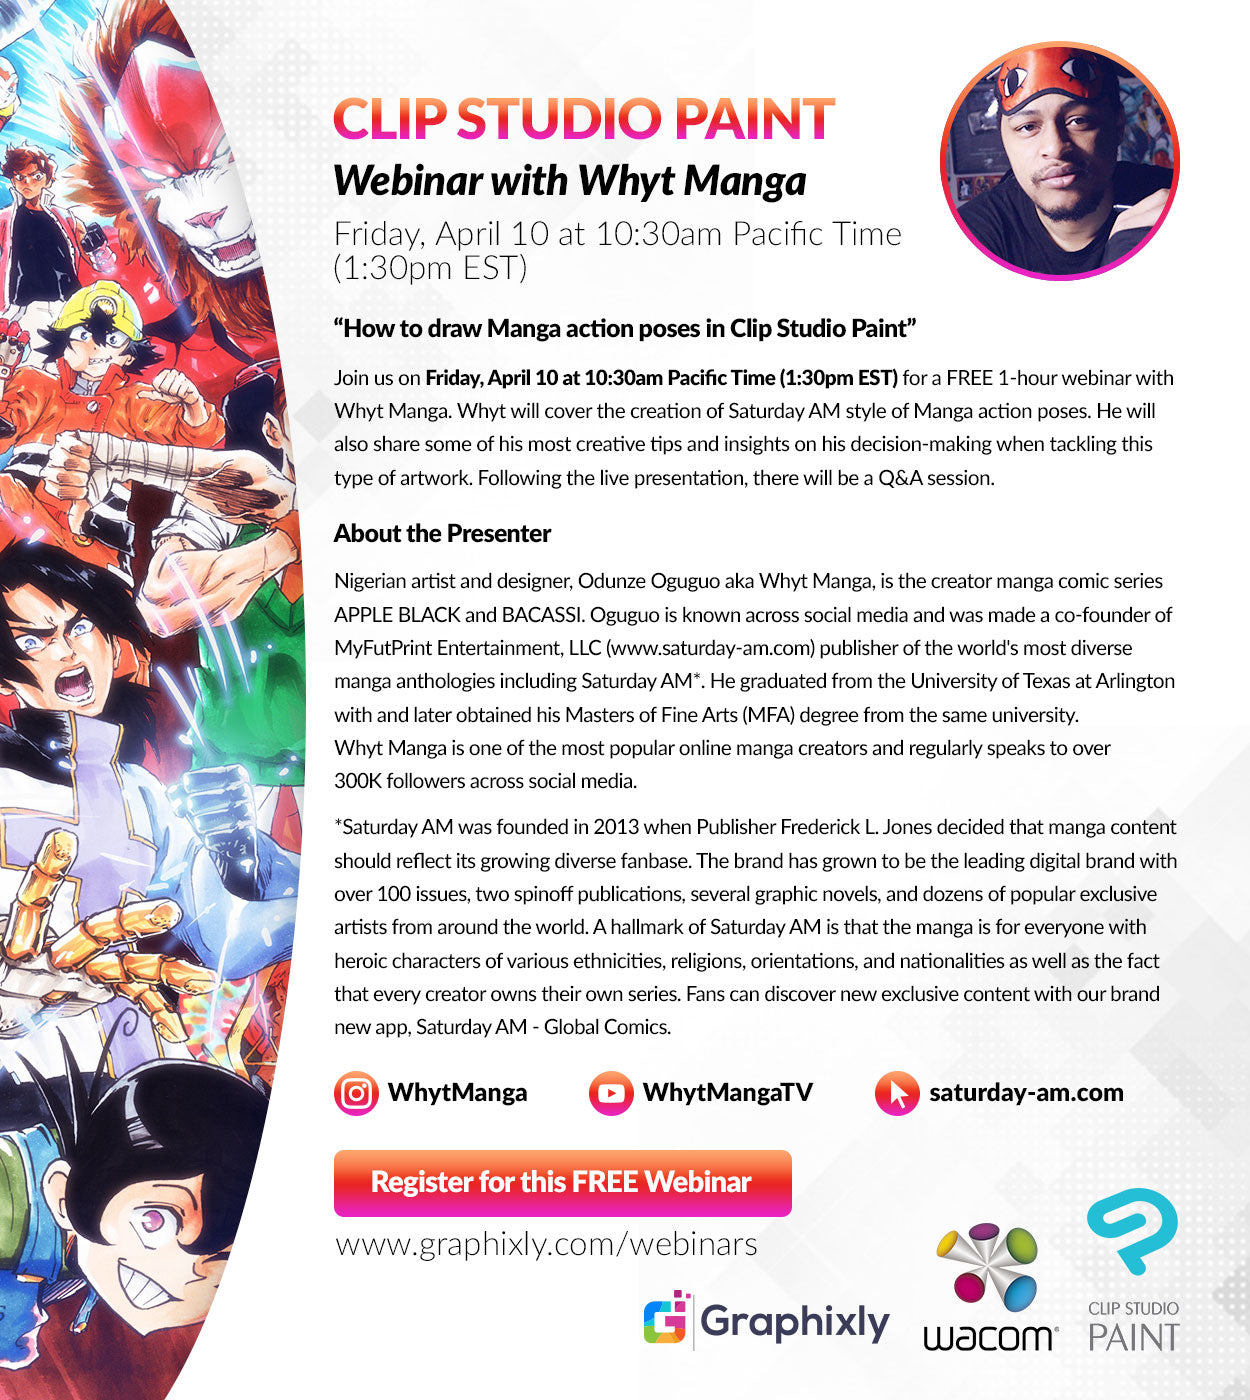 Webinar - “How to draw Manga action poses in Clip Studio Paint” with Whyt Manga